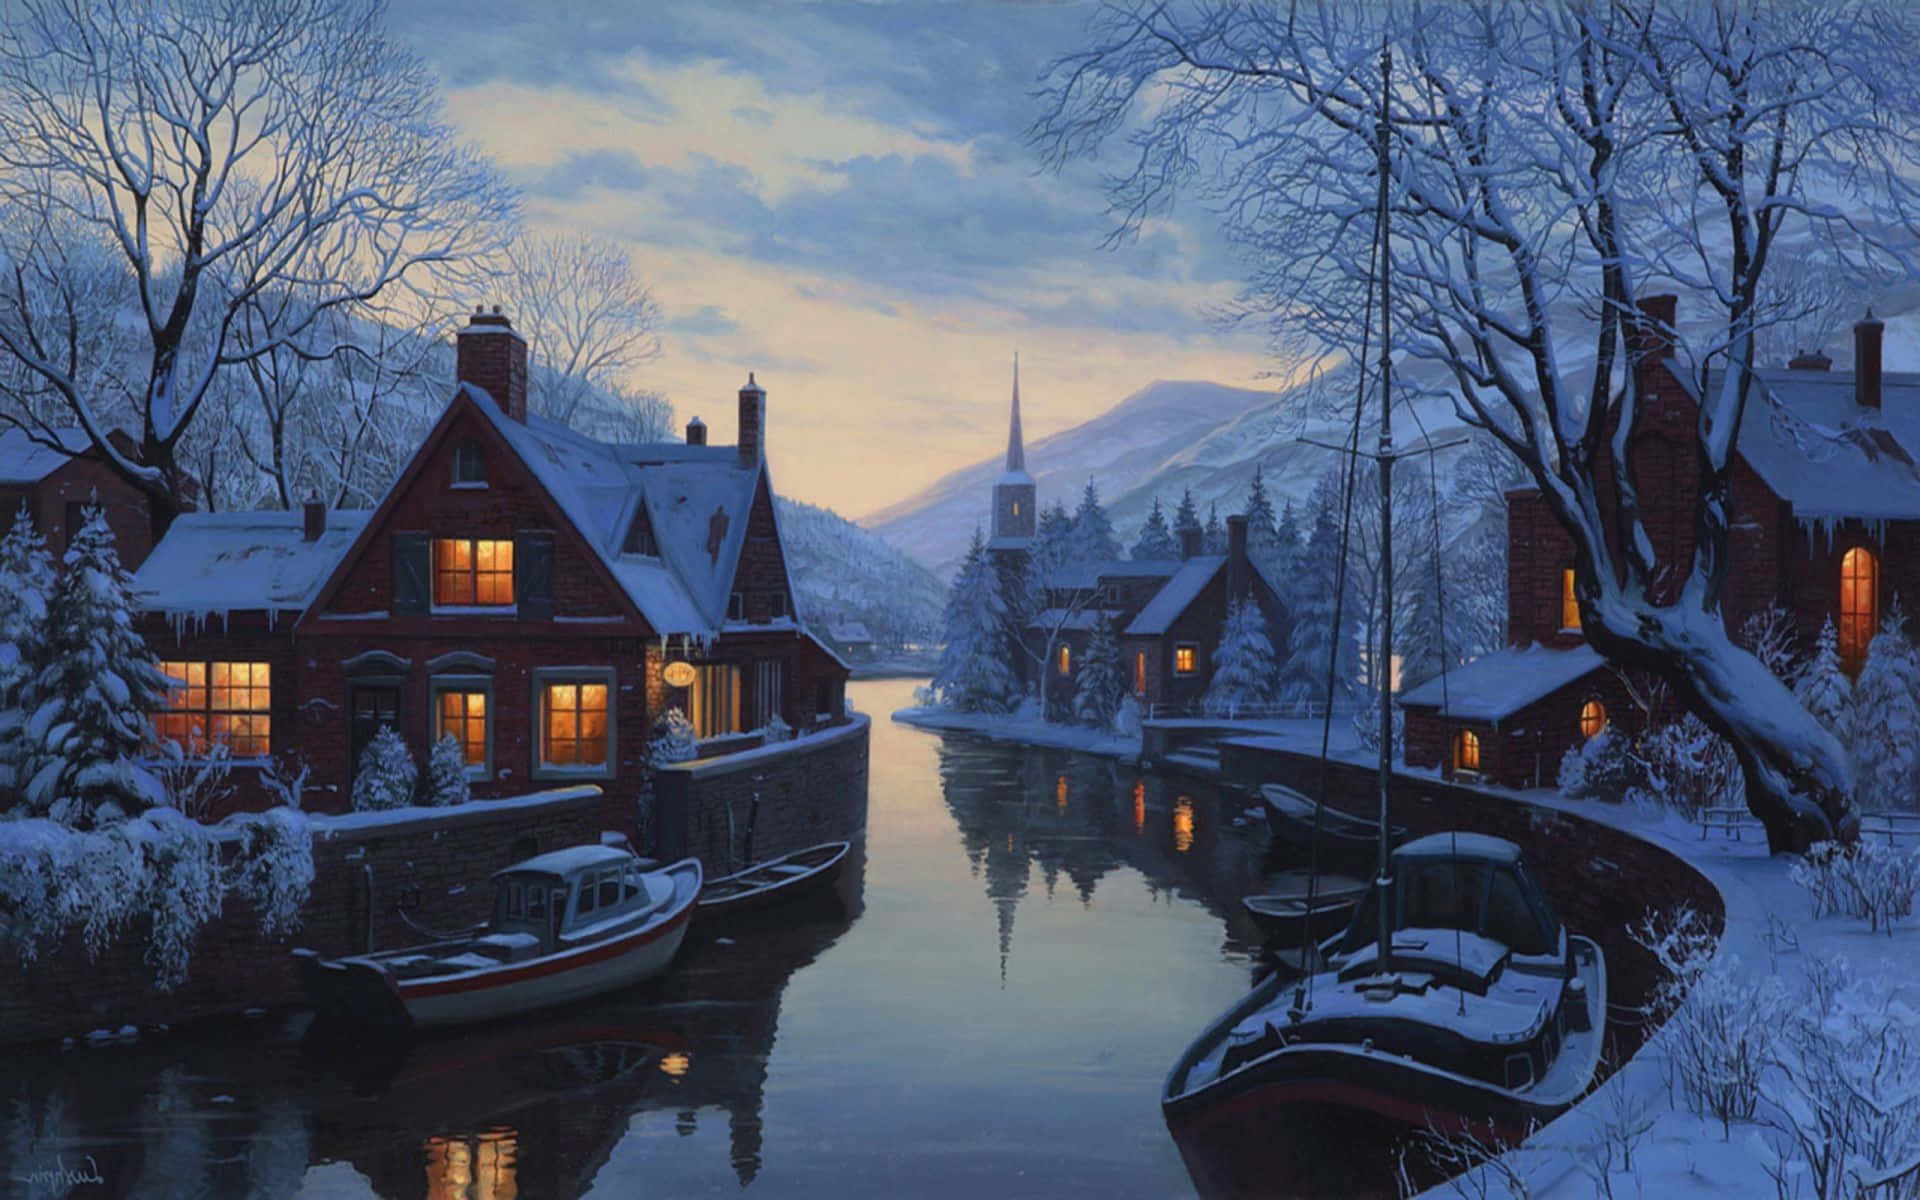 "Catch the Last Rays of Winter in This Quaint Winter Scene" Wallpaper